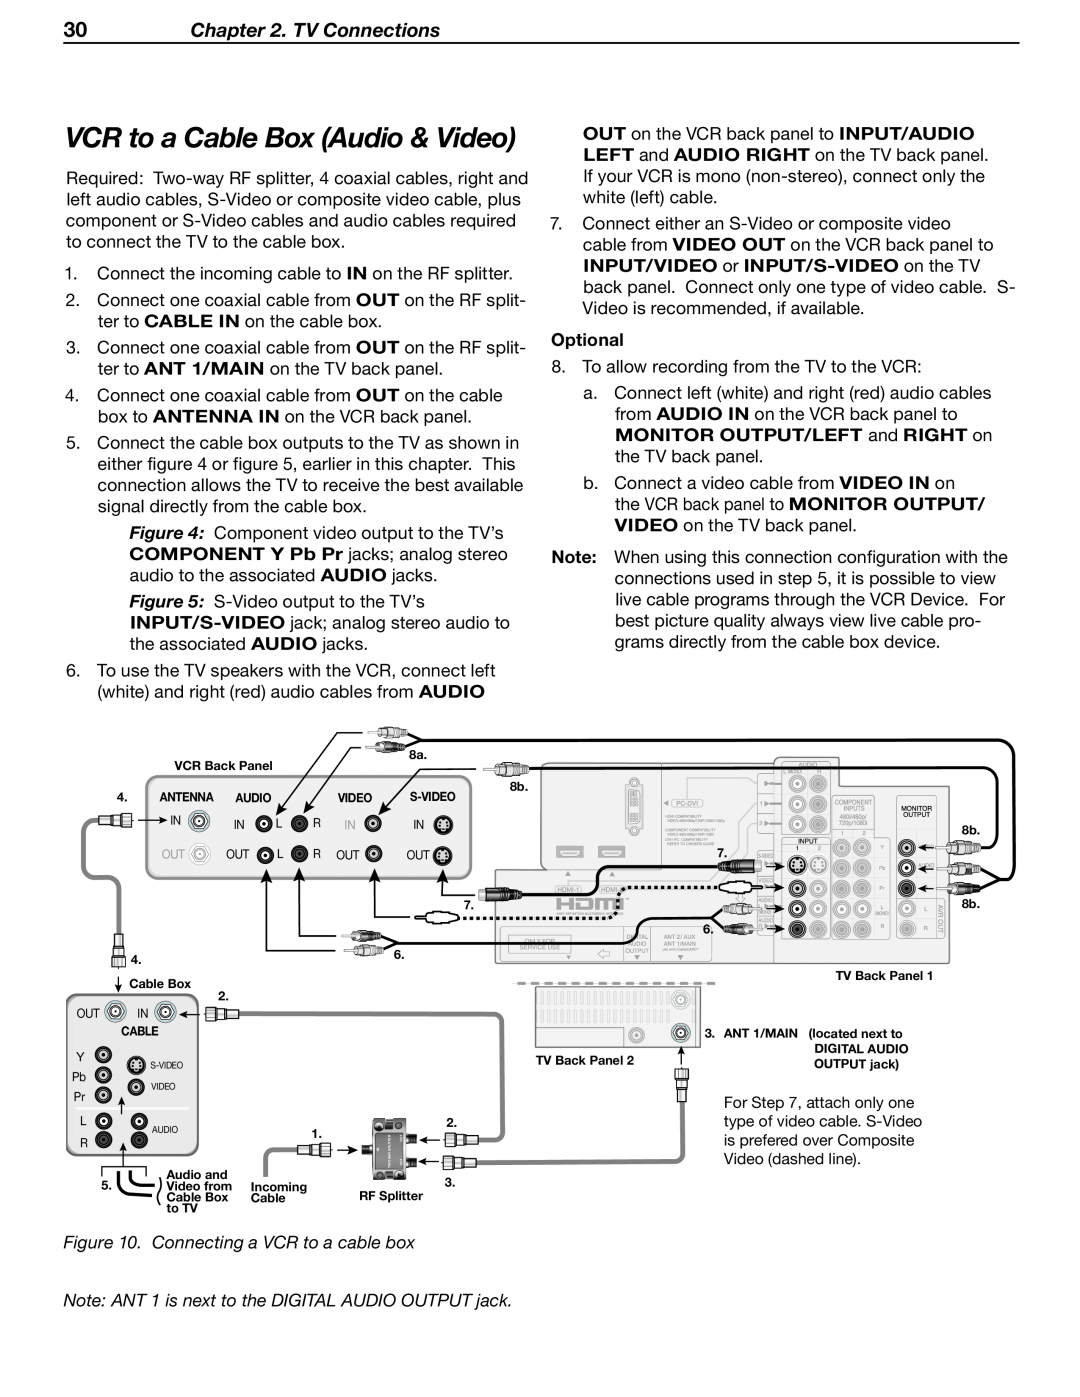 Mitsubishi Electronics LT-37131 manual VCR to a Cable Box Audio & Video, TV Connections, Optional 